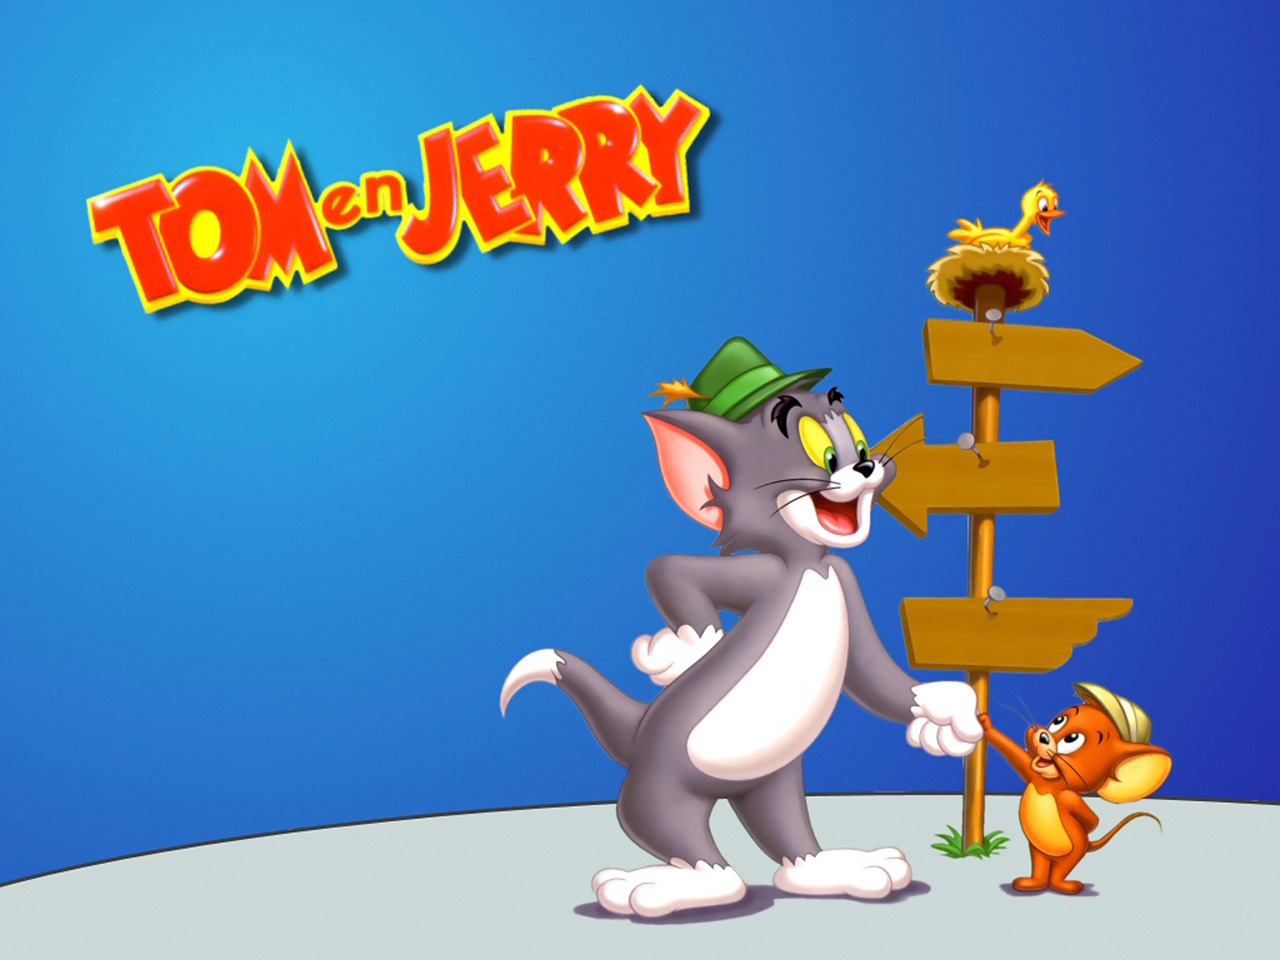 Tom And Jerry Wallpaper 4 - 1280x960 Wallpaper 